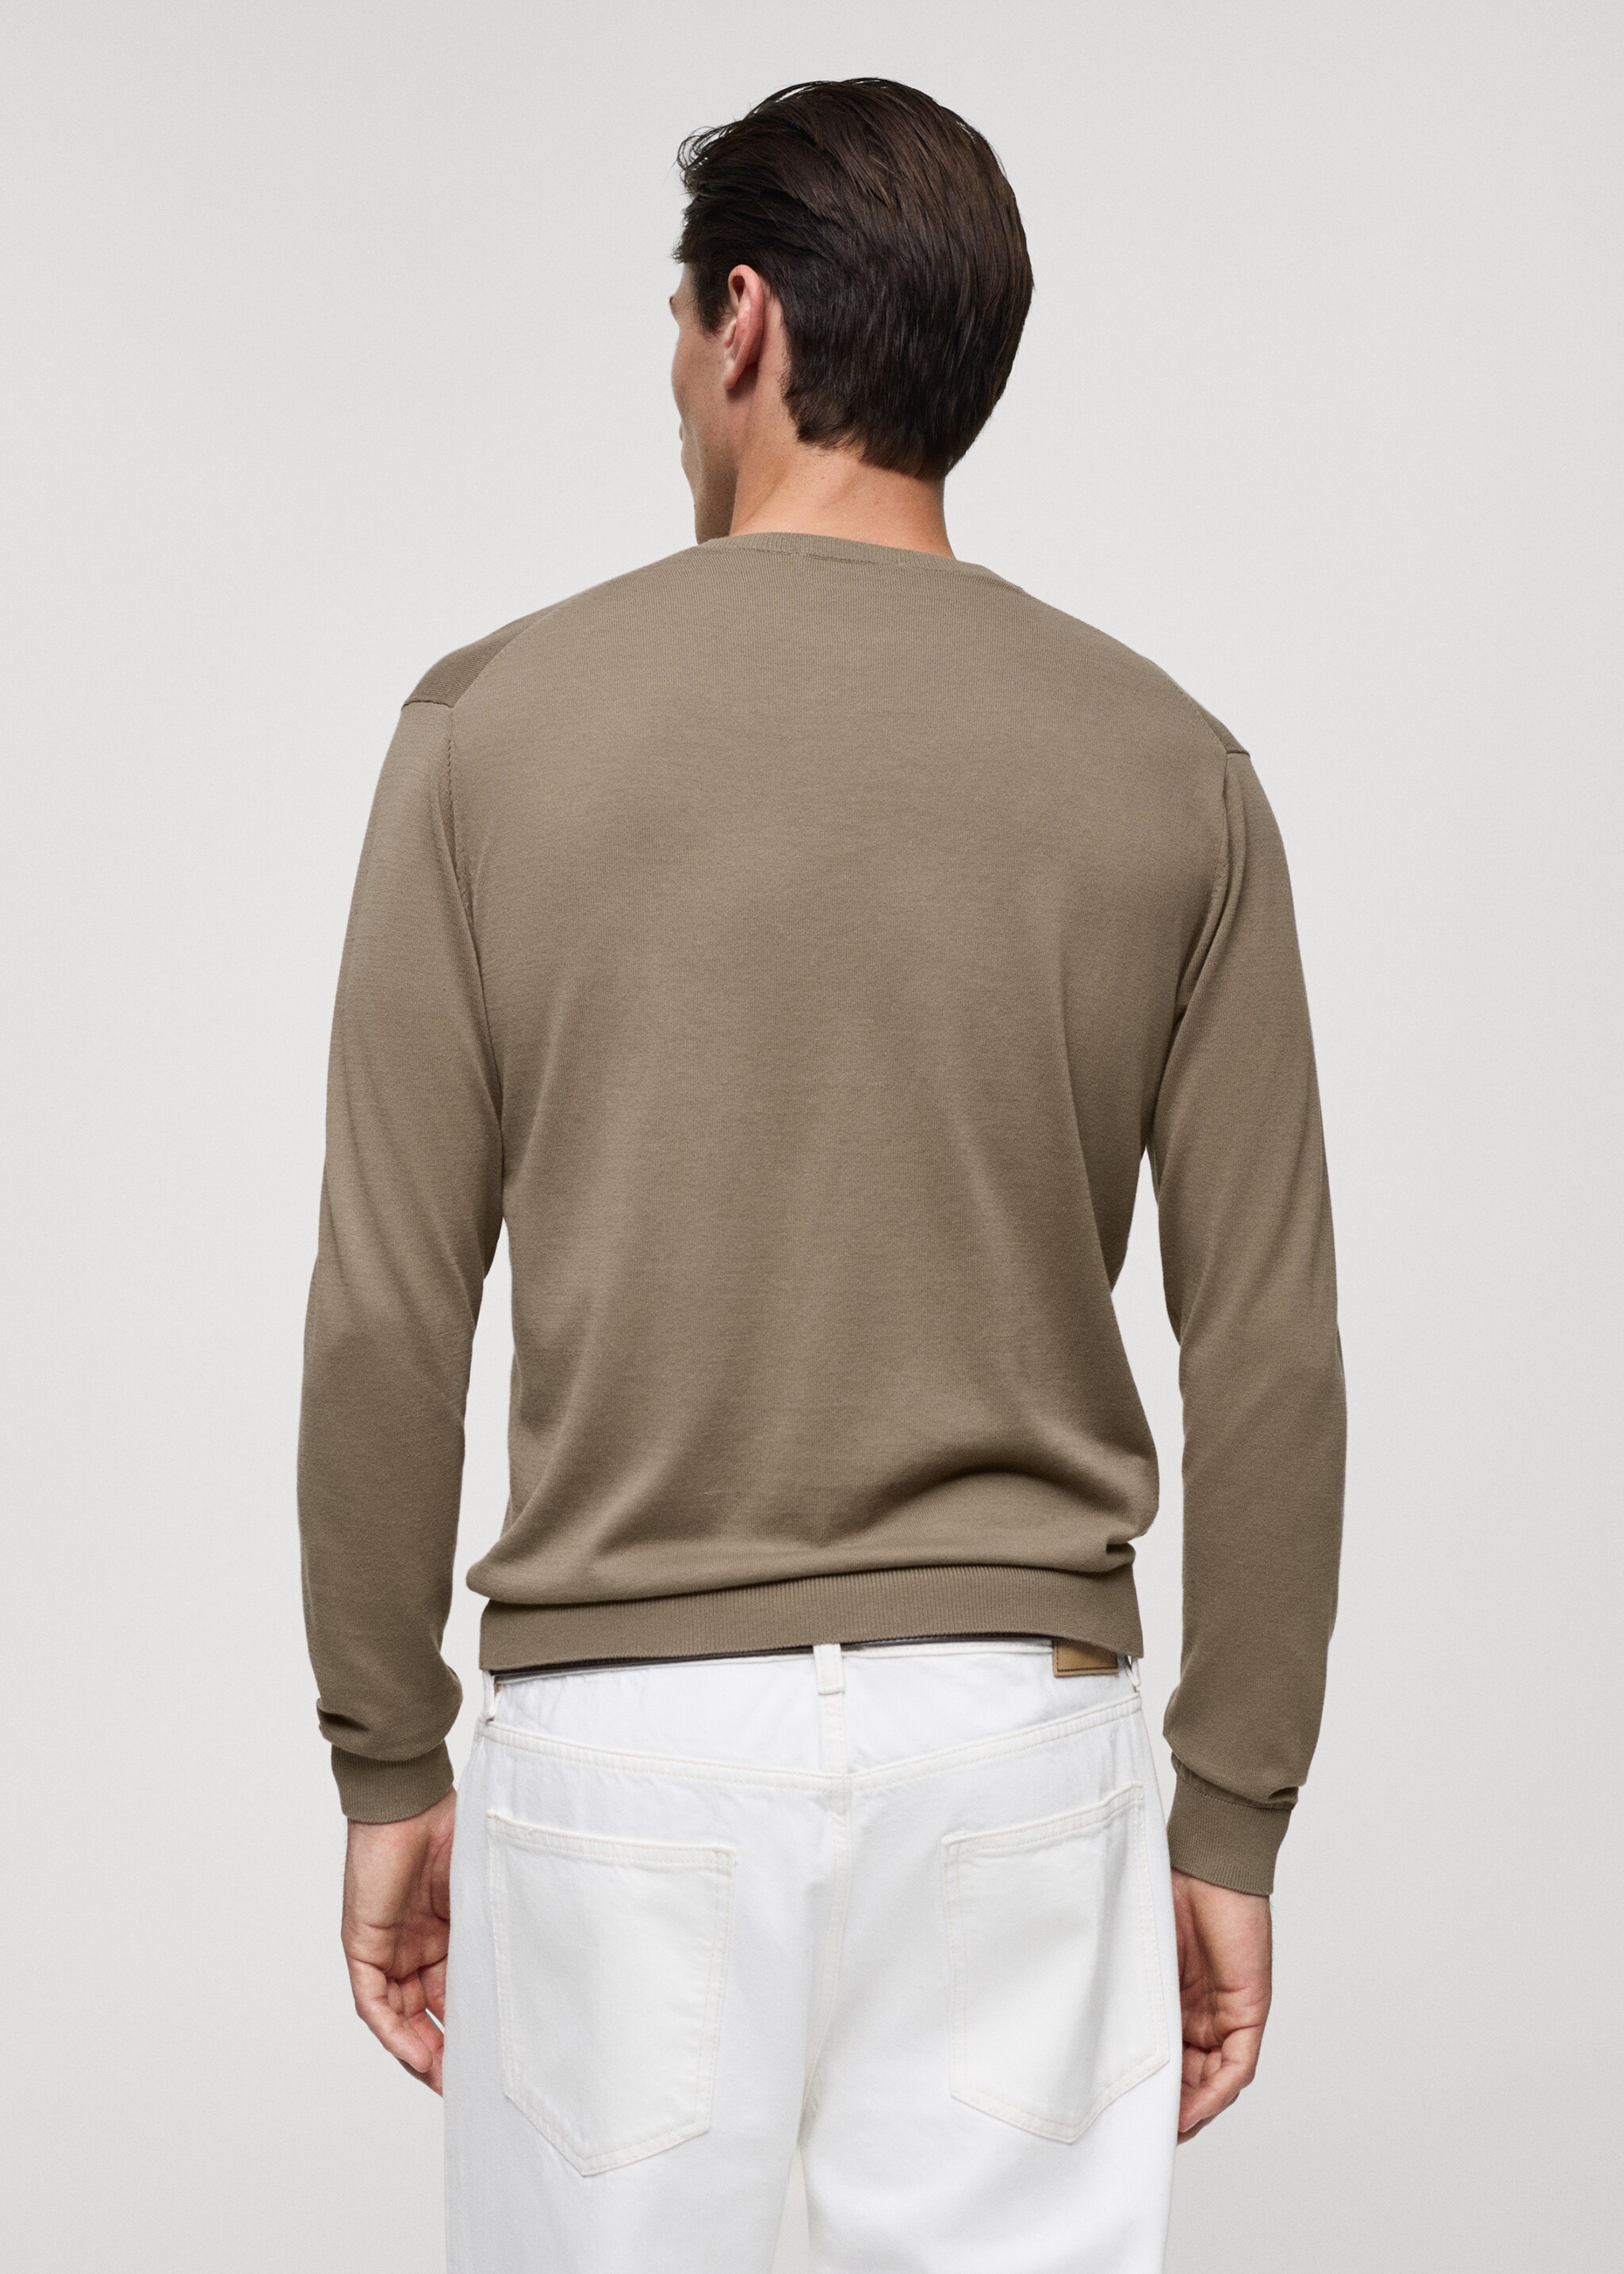 100% cotton fine-knit sweater - Reverse of the article